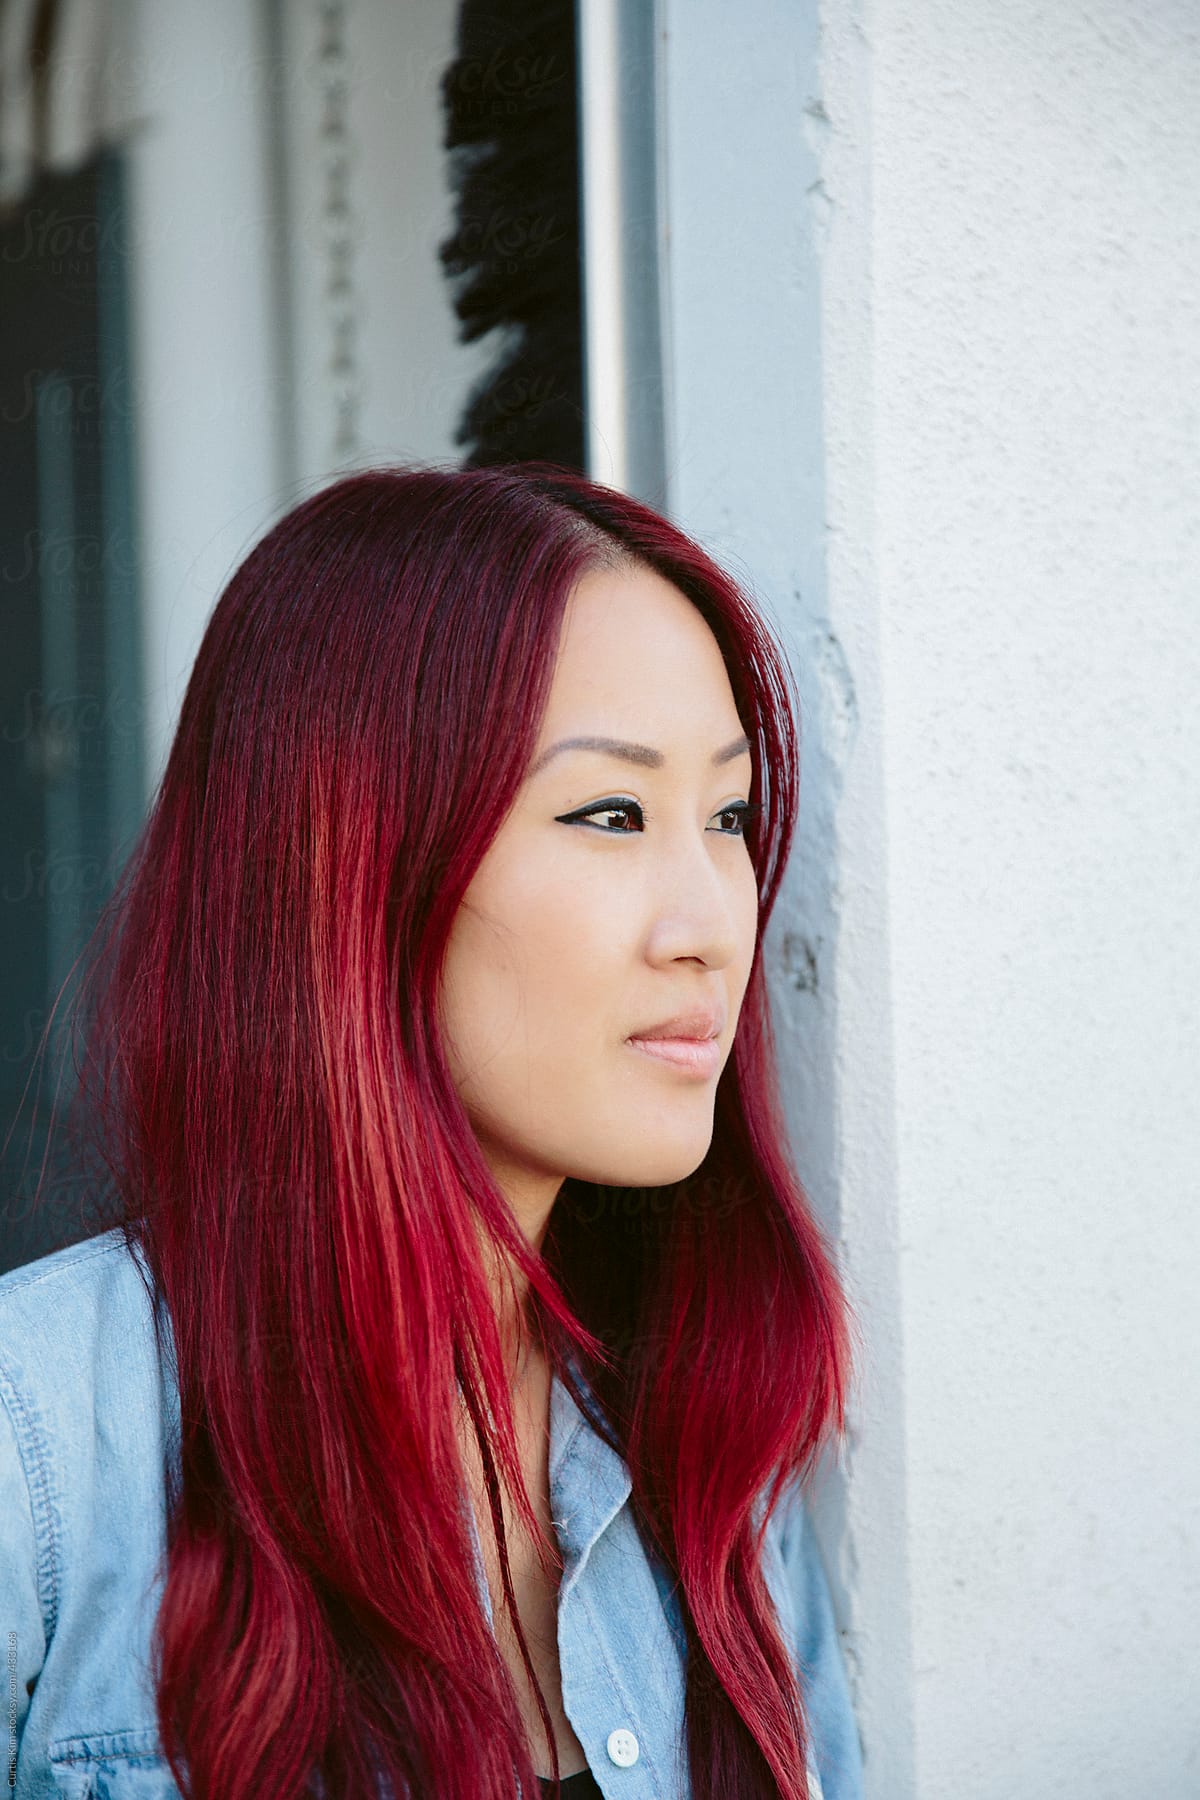 evig i gang pengeoverførsel Asian Female With Red Hair" by Stocksy Contributor "Curtis Kim" - Stocksy